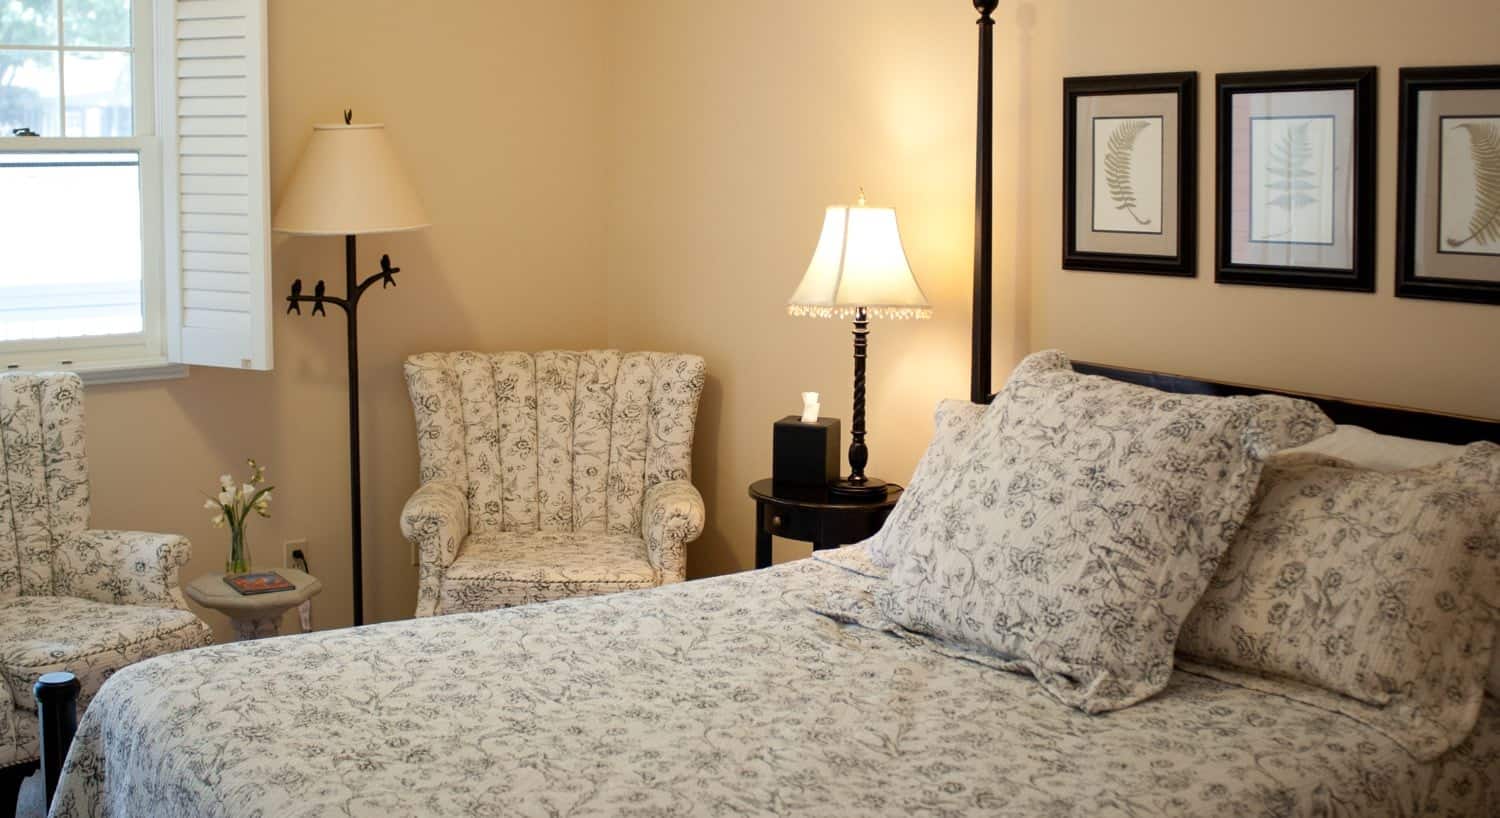 Dark wood four-post bed with floral bedding and chairs to match